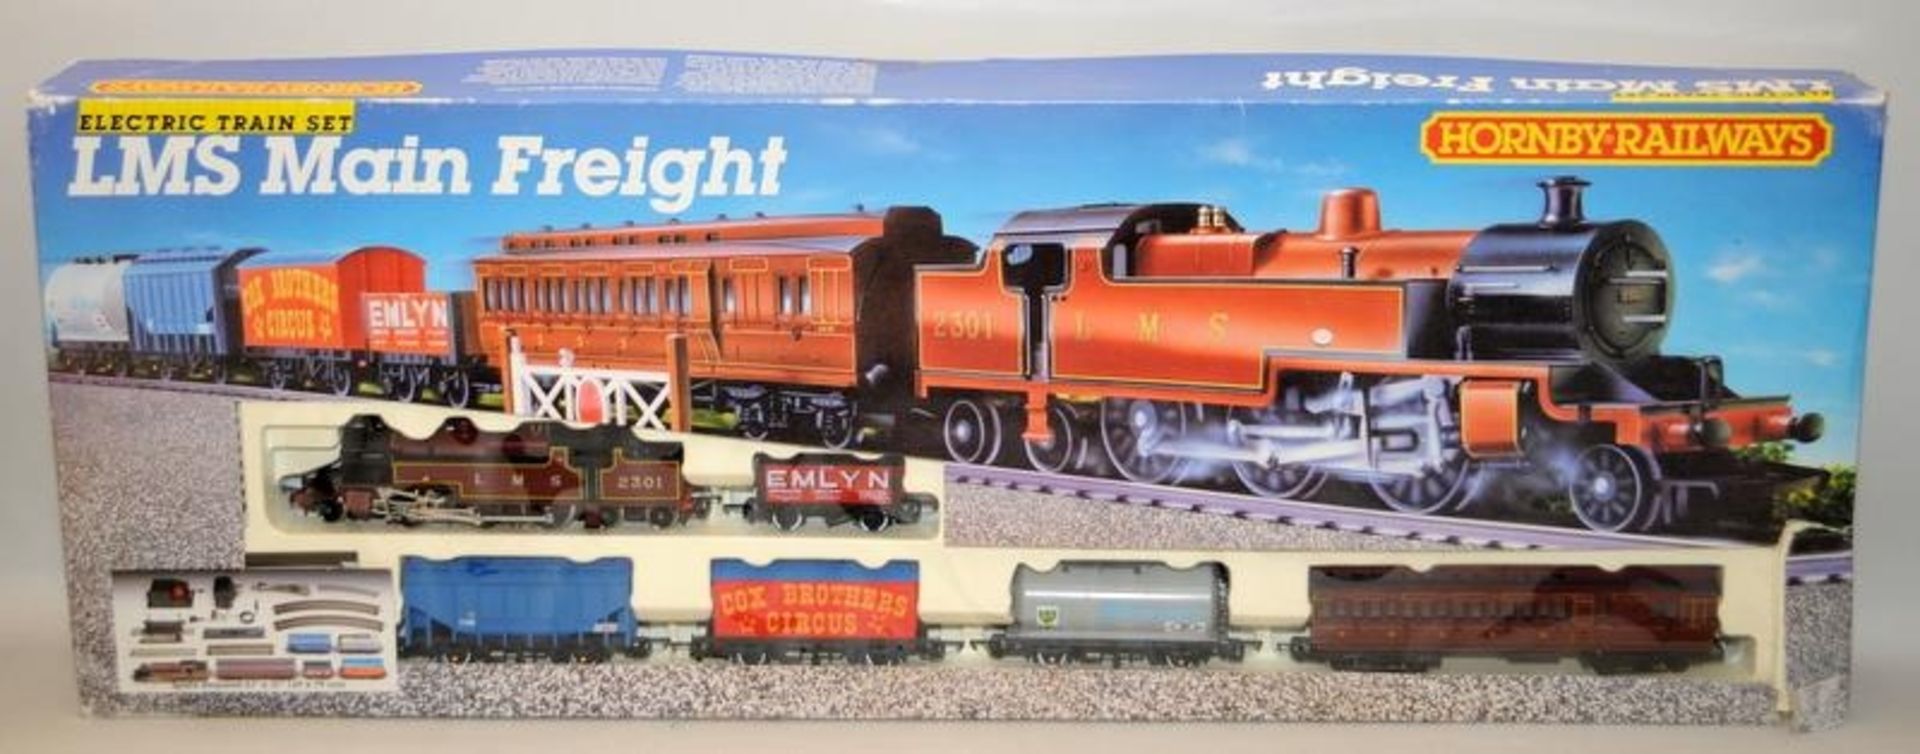 Hornby OO Gauge LMS Main Freight Electric Train Set R886. Storage wear to box. Appears complete